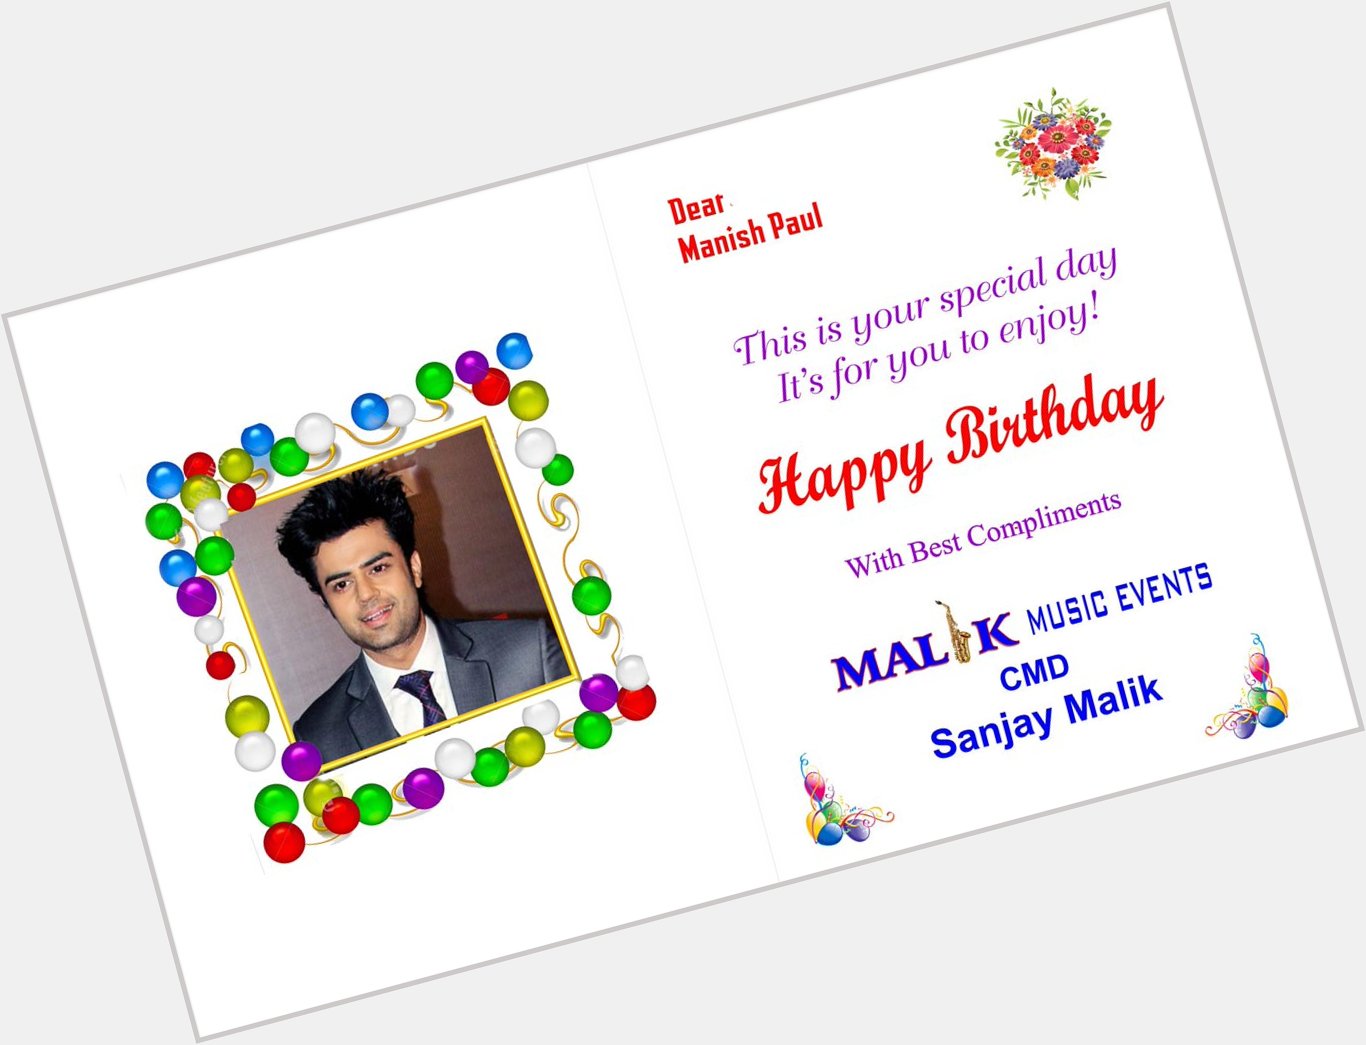 Happy birthday my younger brother Manish paul all time my favourite mata rani bless you   